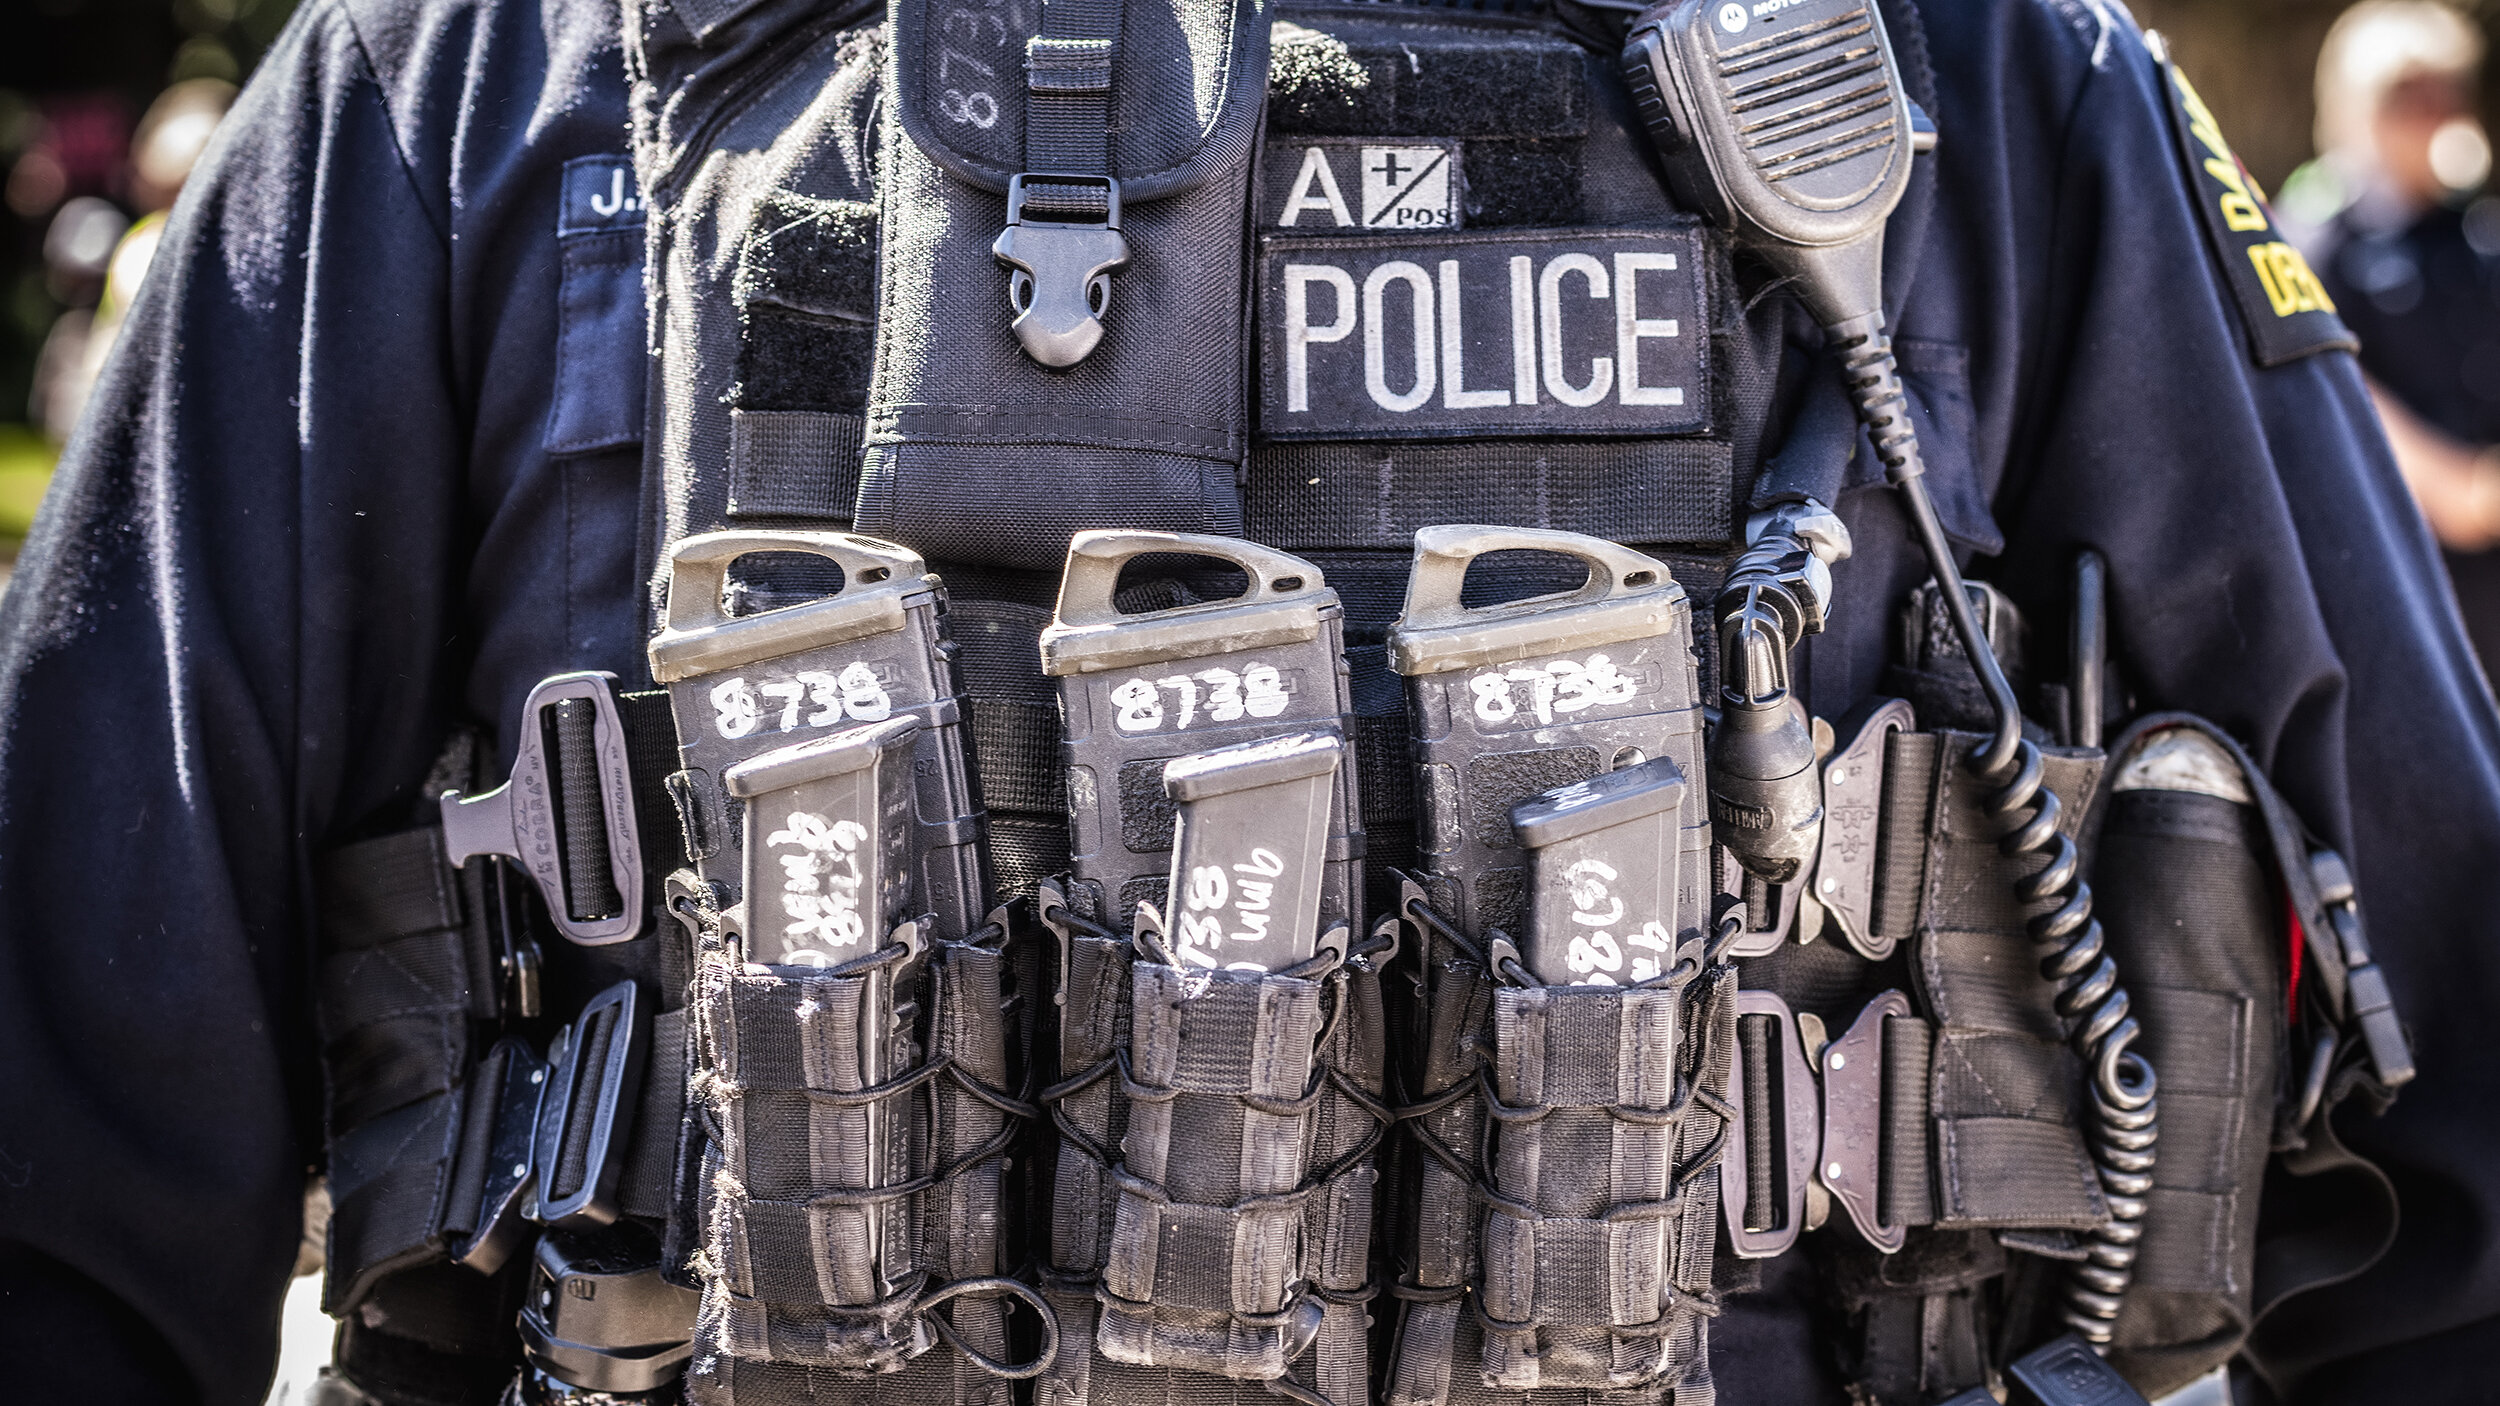  A police officer is laden with magazines at a protest during President Donald Trump’s visit to Gateway Church in the Preston Hollow neighborhood of Dallas, TX on June 11, 2020.  Some officers carried rifles or grenade launchers. 